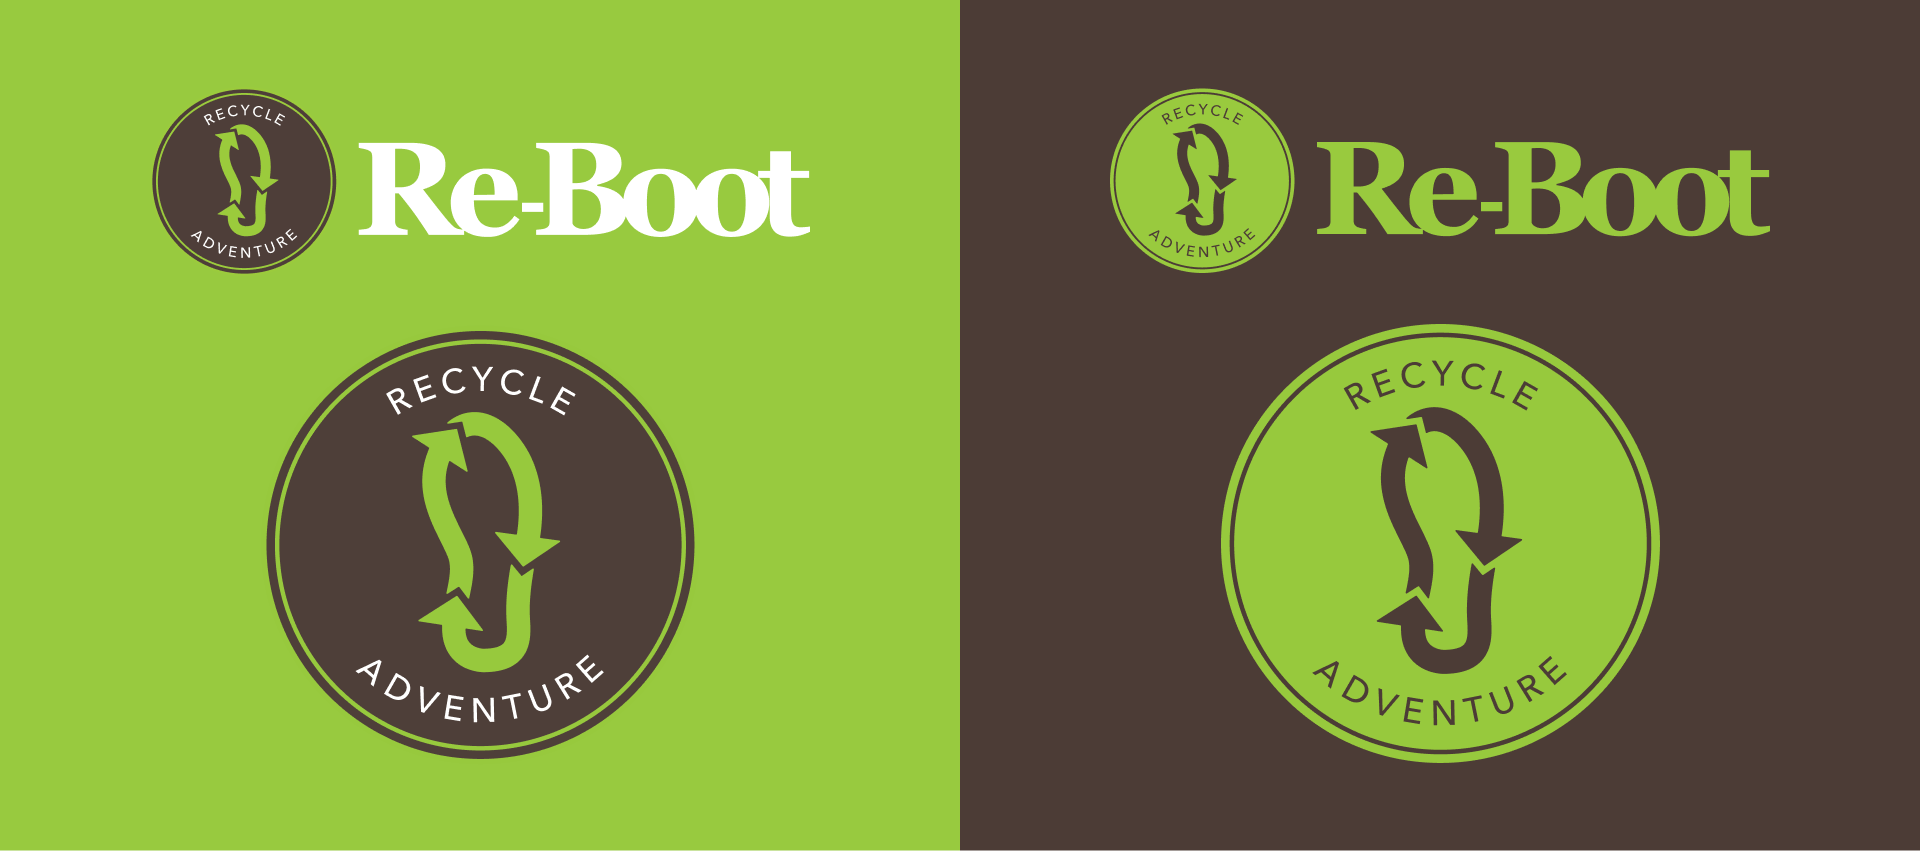 Re-Boot logo examples